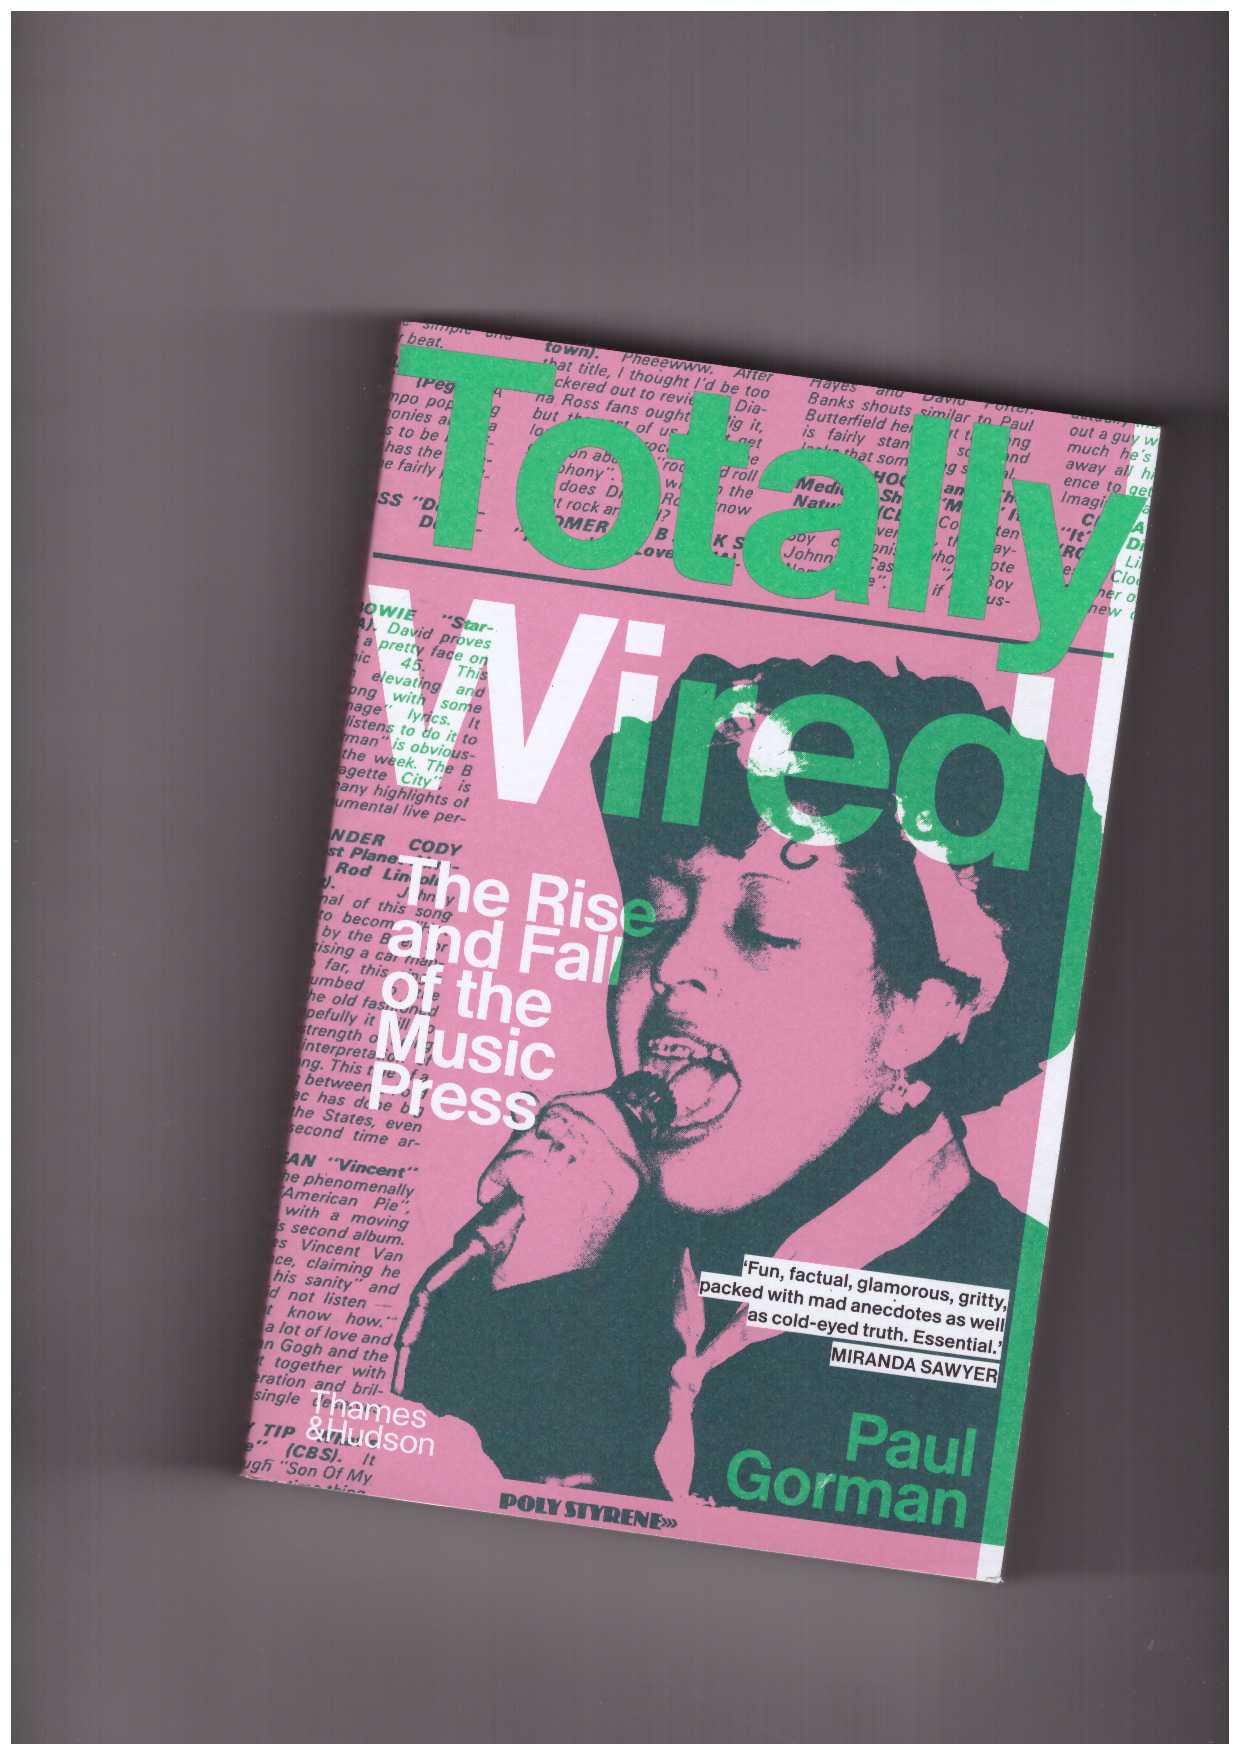 GORMAN, Paul - Totally Wired. The Rise and Fall of the Music Press